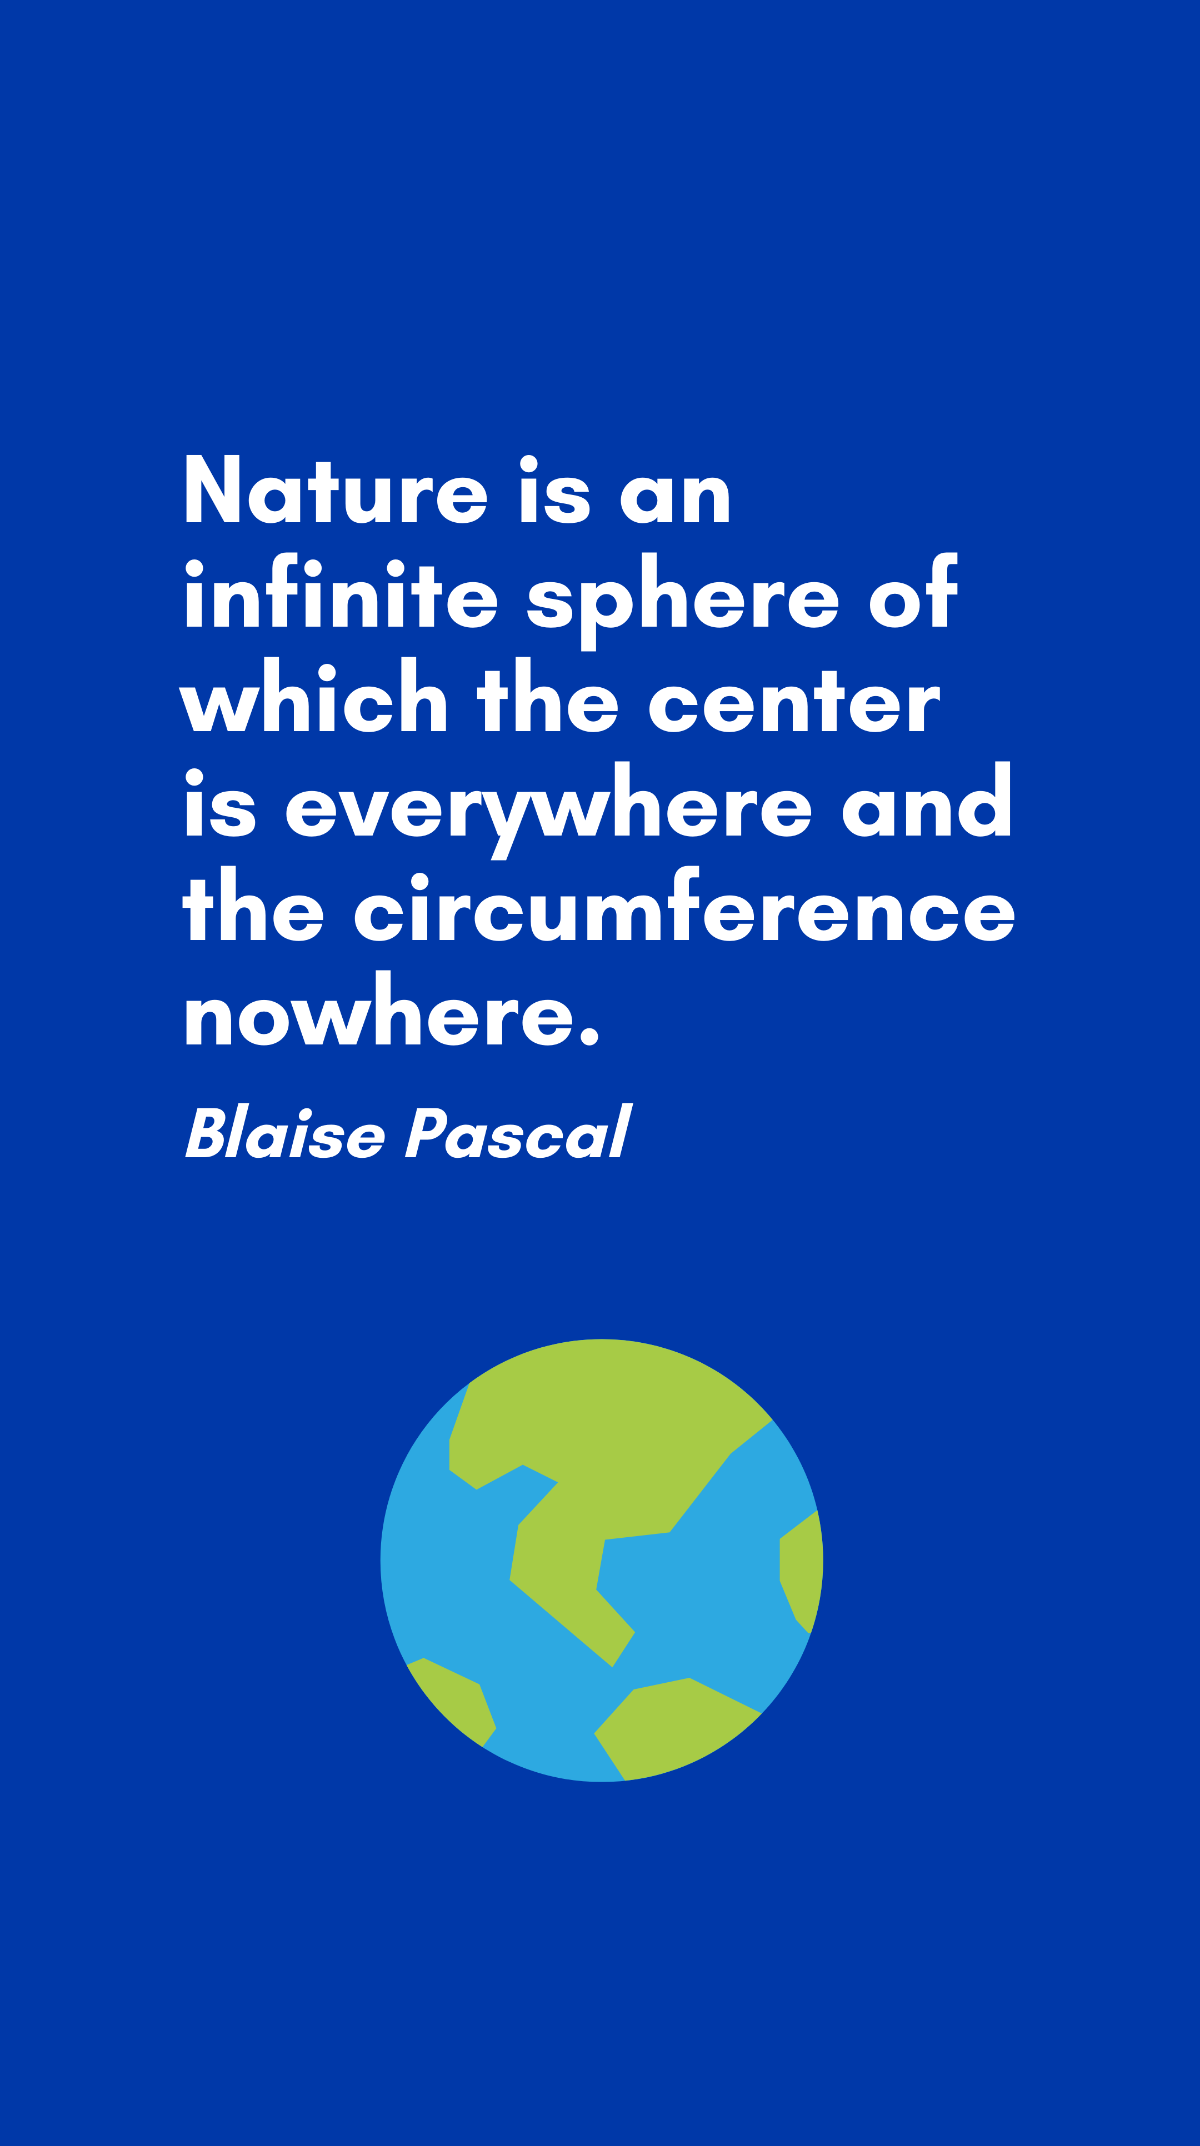 Blaise Pascal - Nature is an infinite sphere of which the center is everywhere and the circumference nowhere. Template